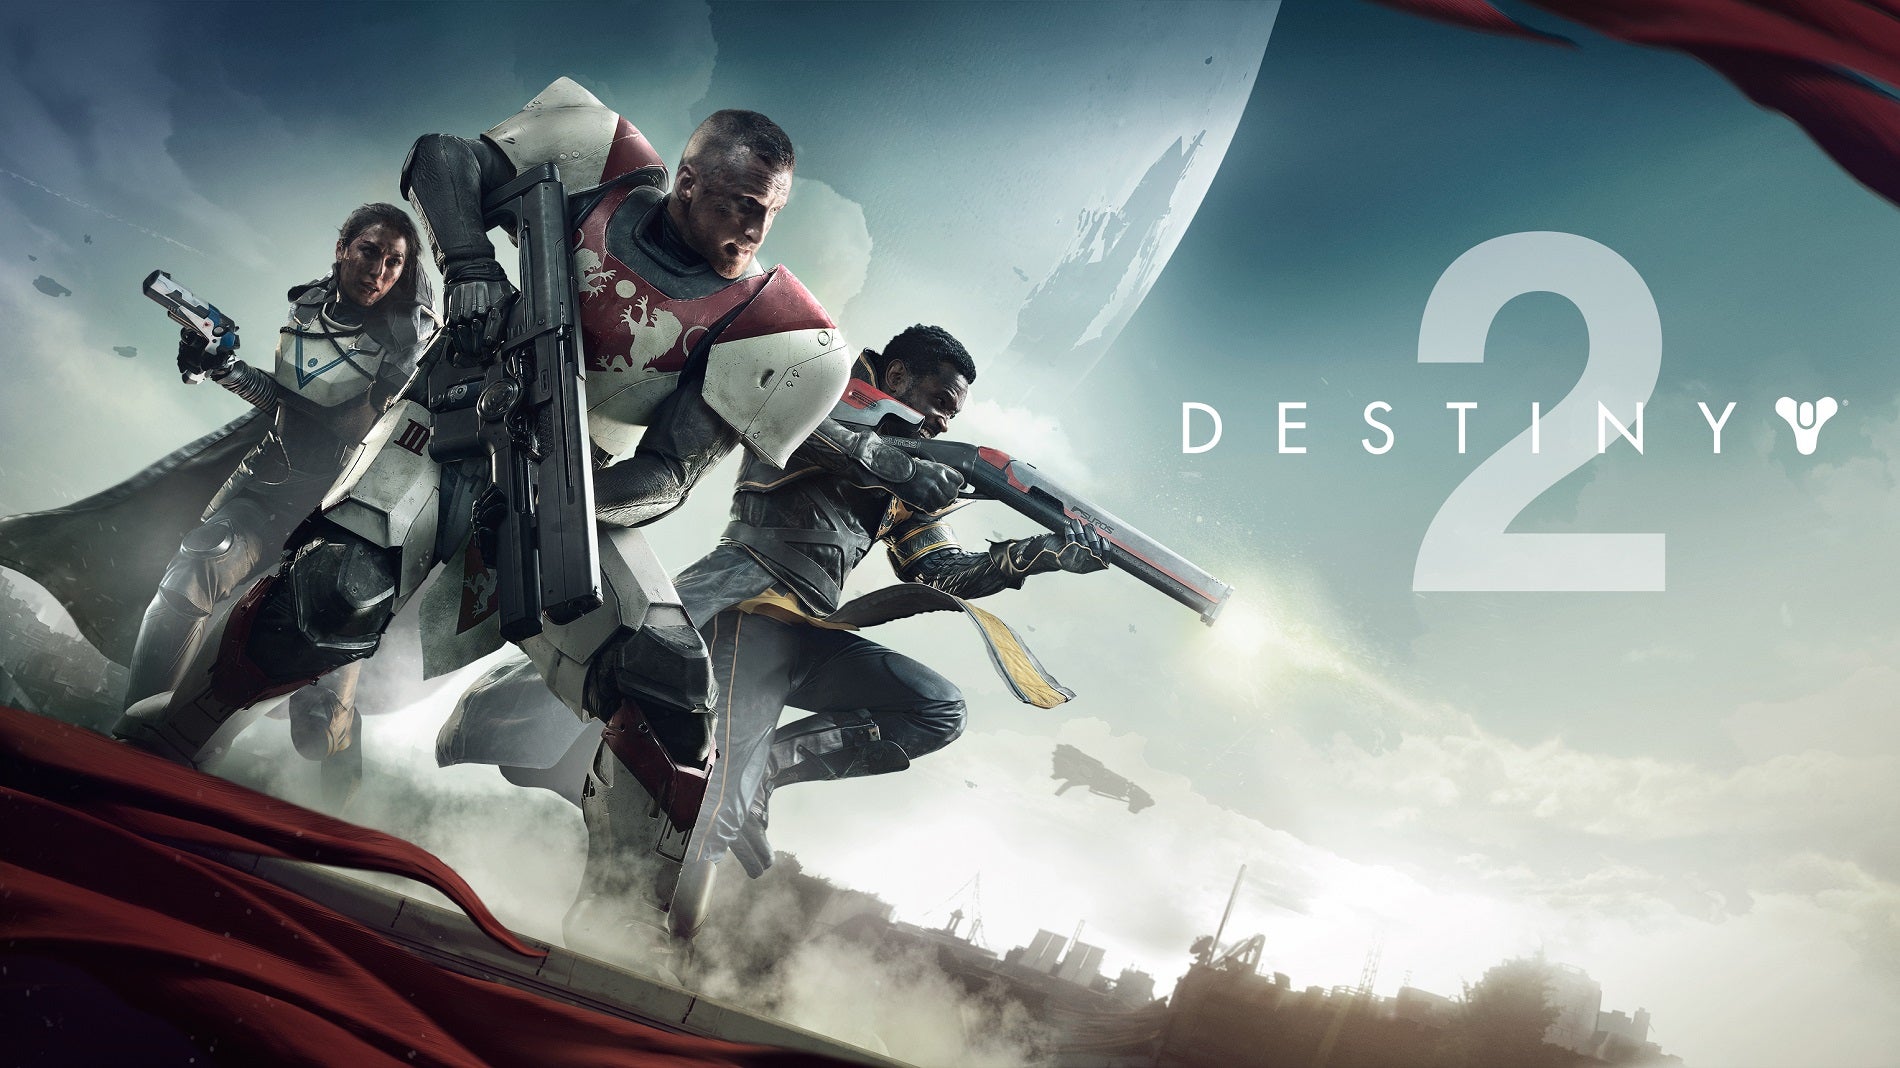 Image for Black Friday 2017: Destiny 2 discounted to £19.99 at HMV